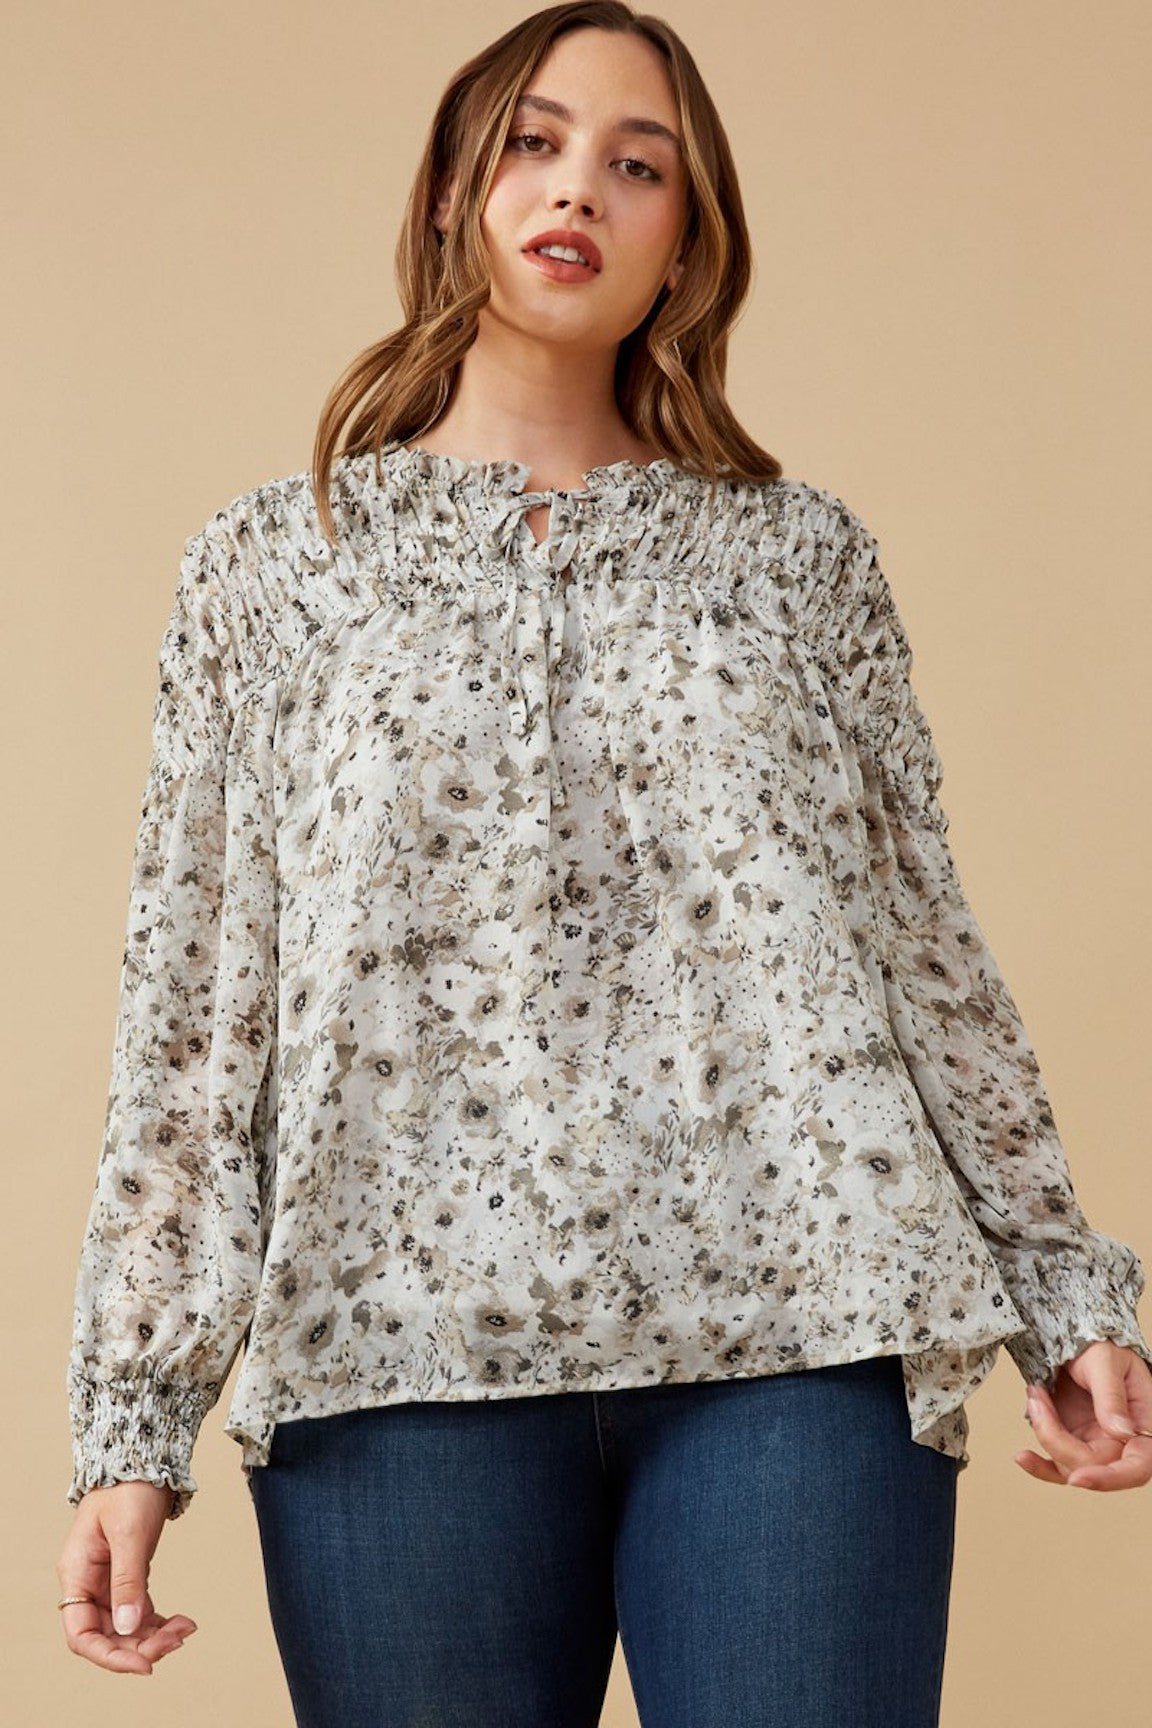 Toni Grey and White Floral Blouse - *CURVY*